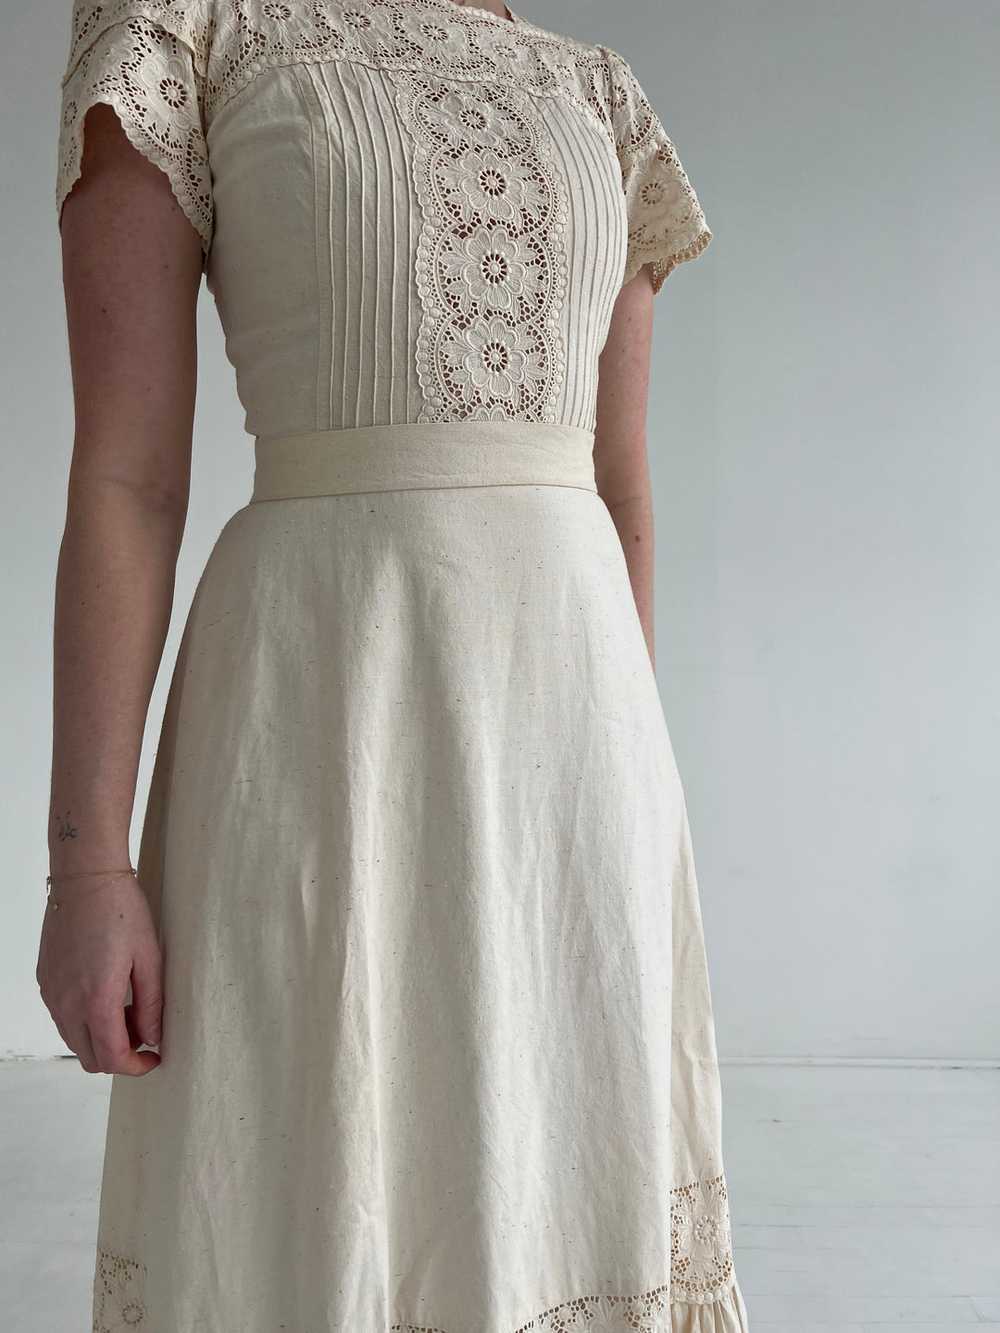 1970's Cotton Dress with Eyelet - image 4